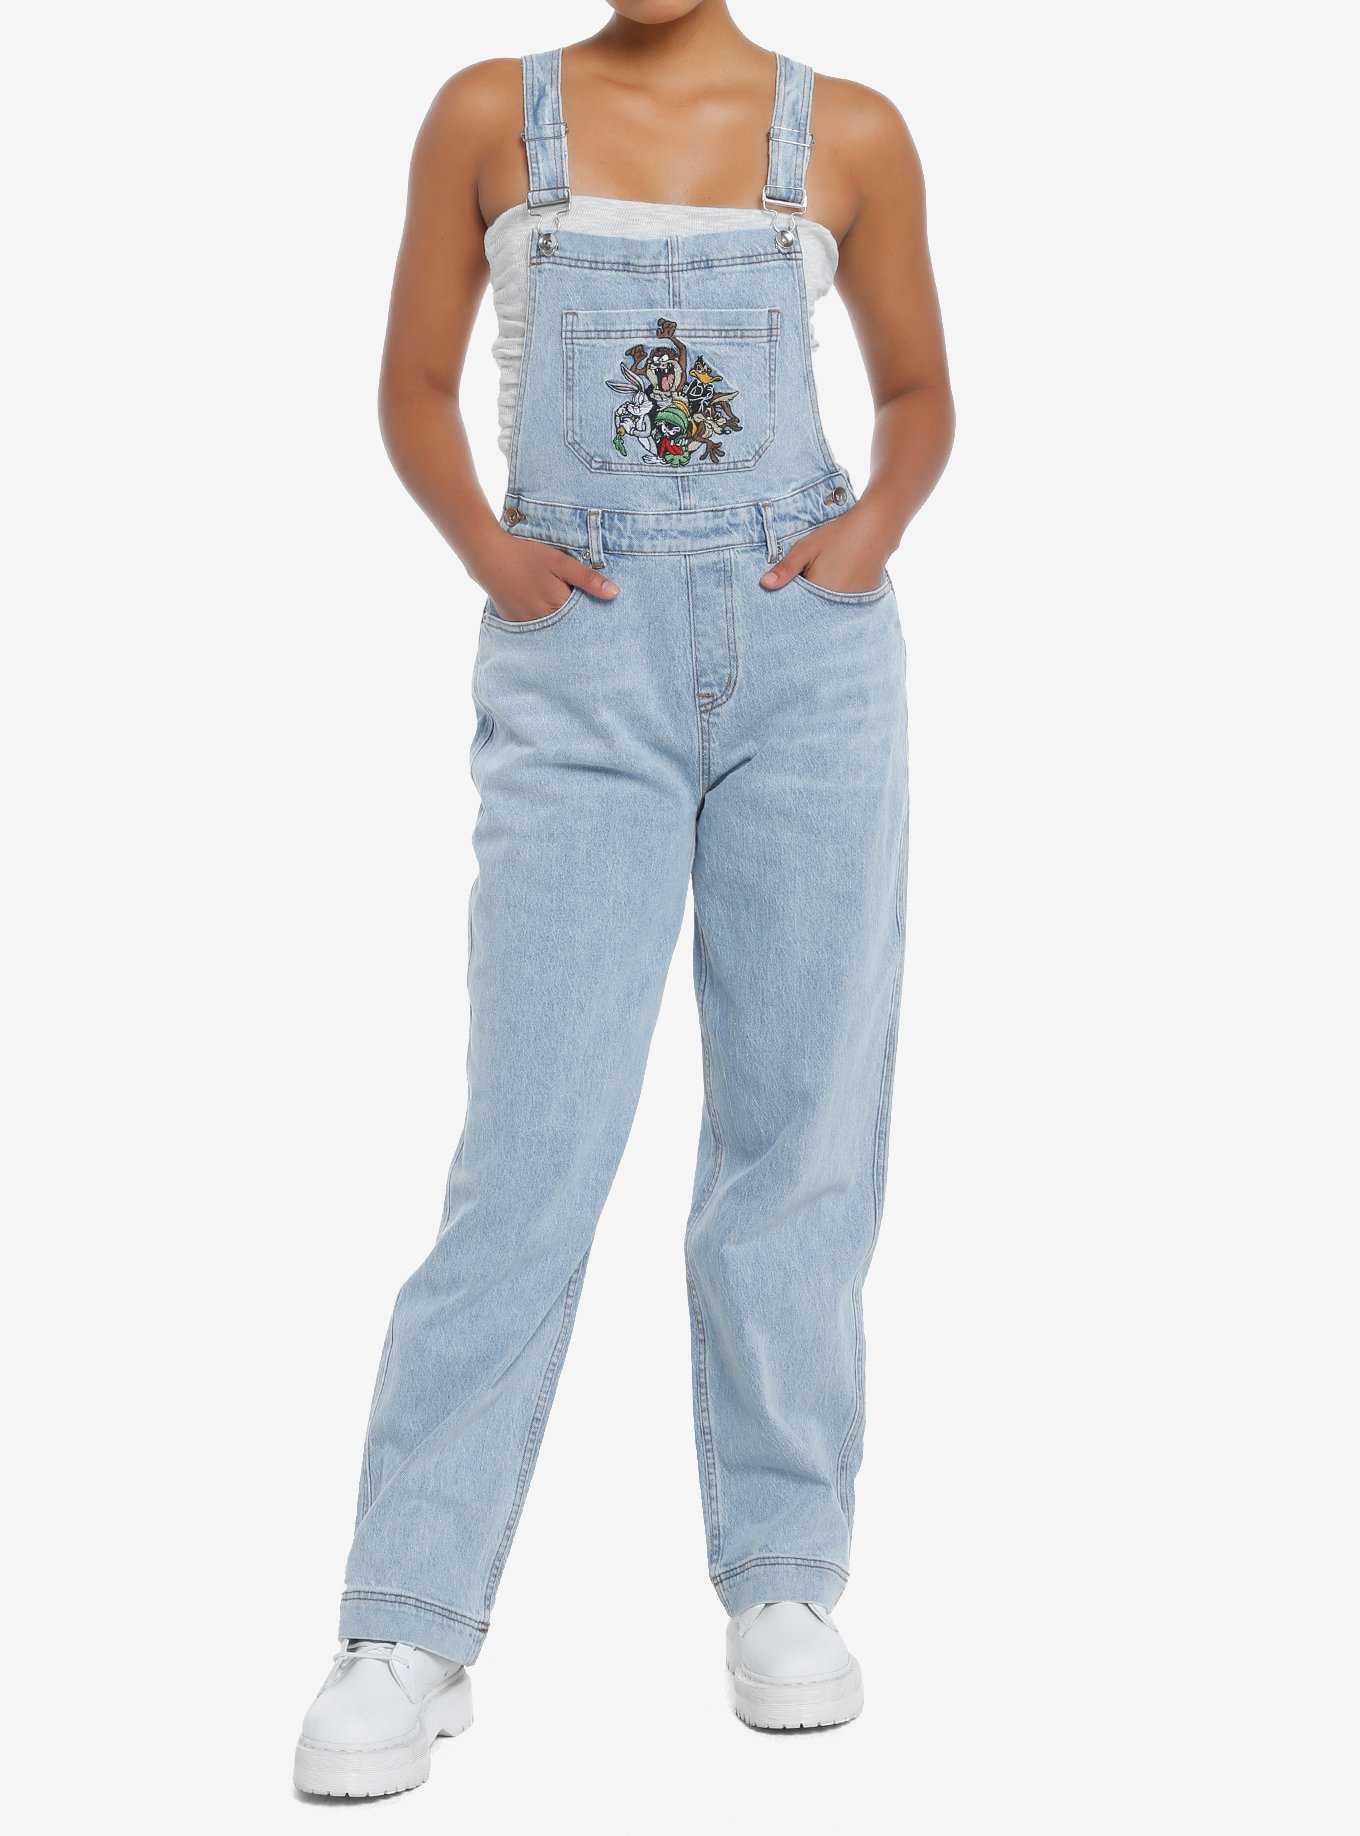 Looney Tunes Embroidered Girls Overalls, , hi-res